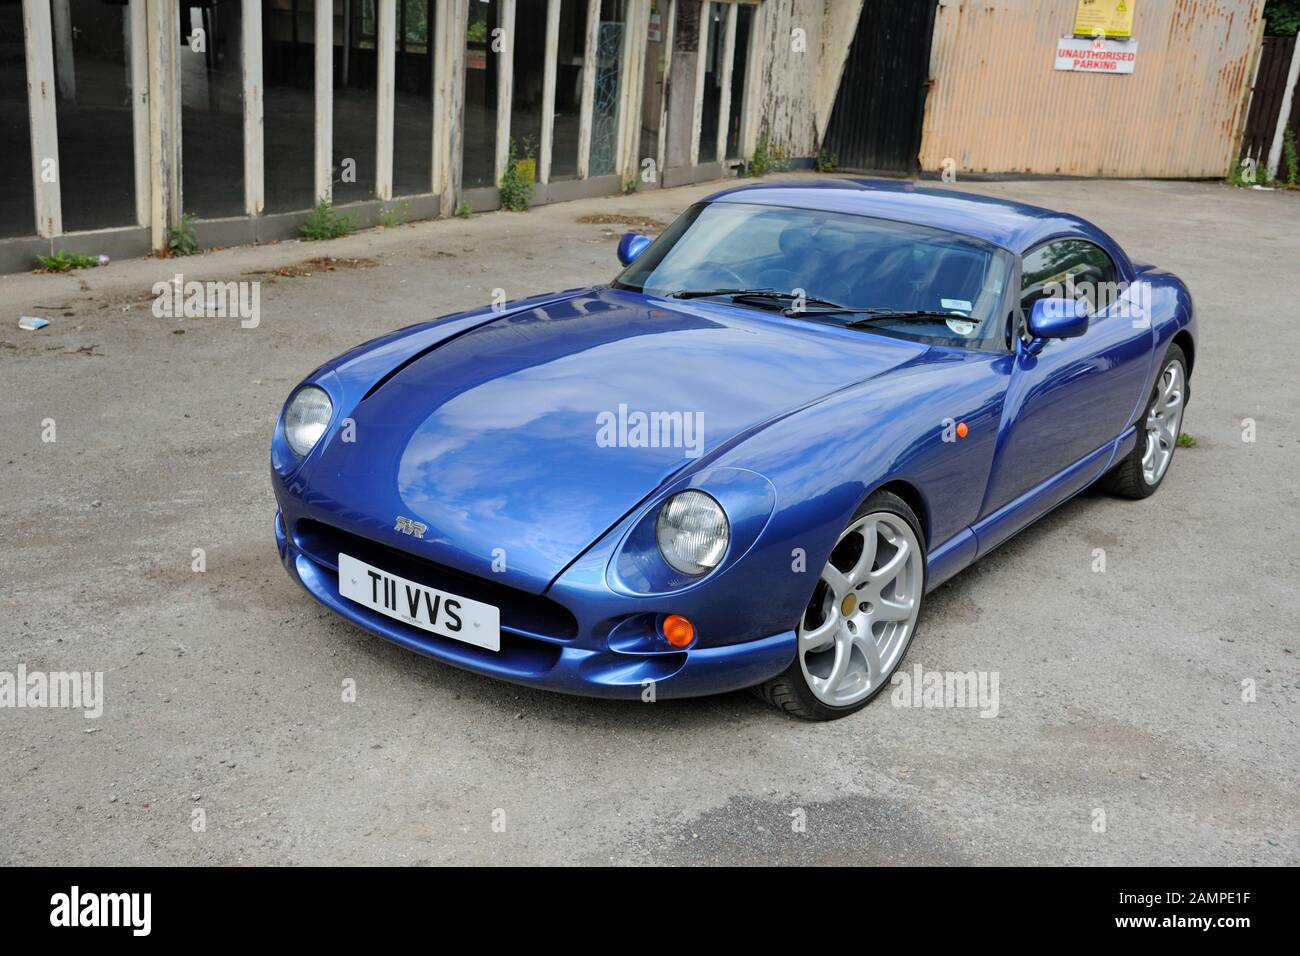 British TVR Cerbera muscle car parked in front of a disused garage showroom Stock Photo